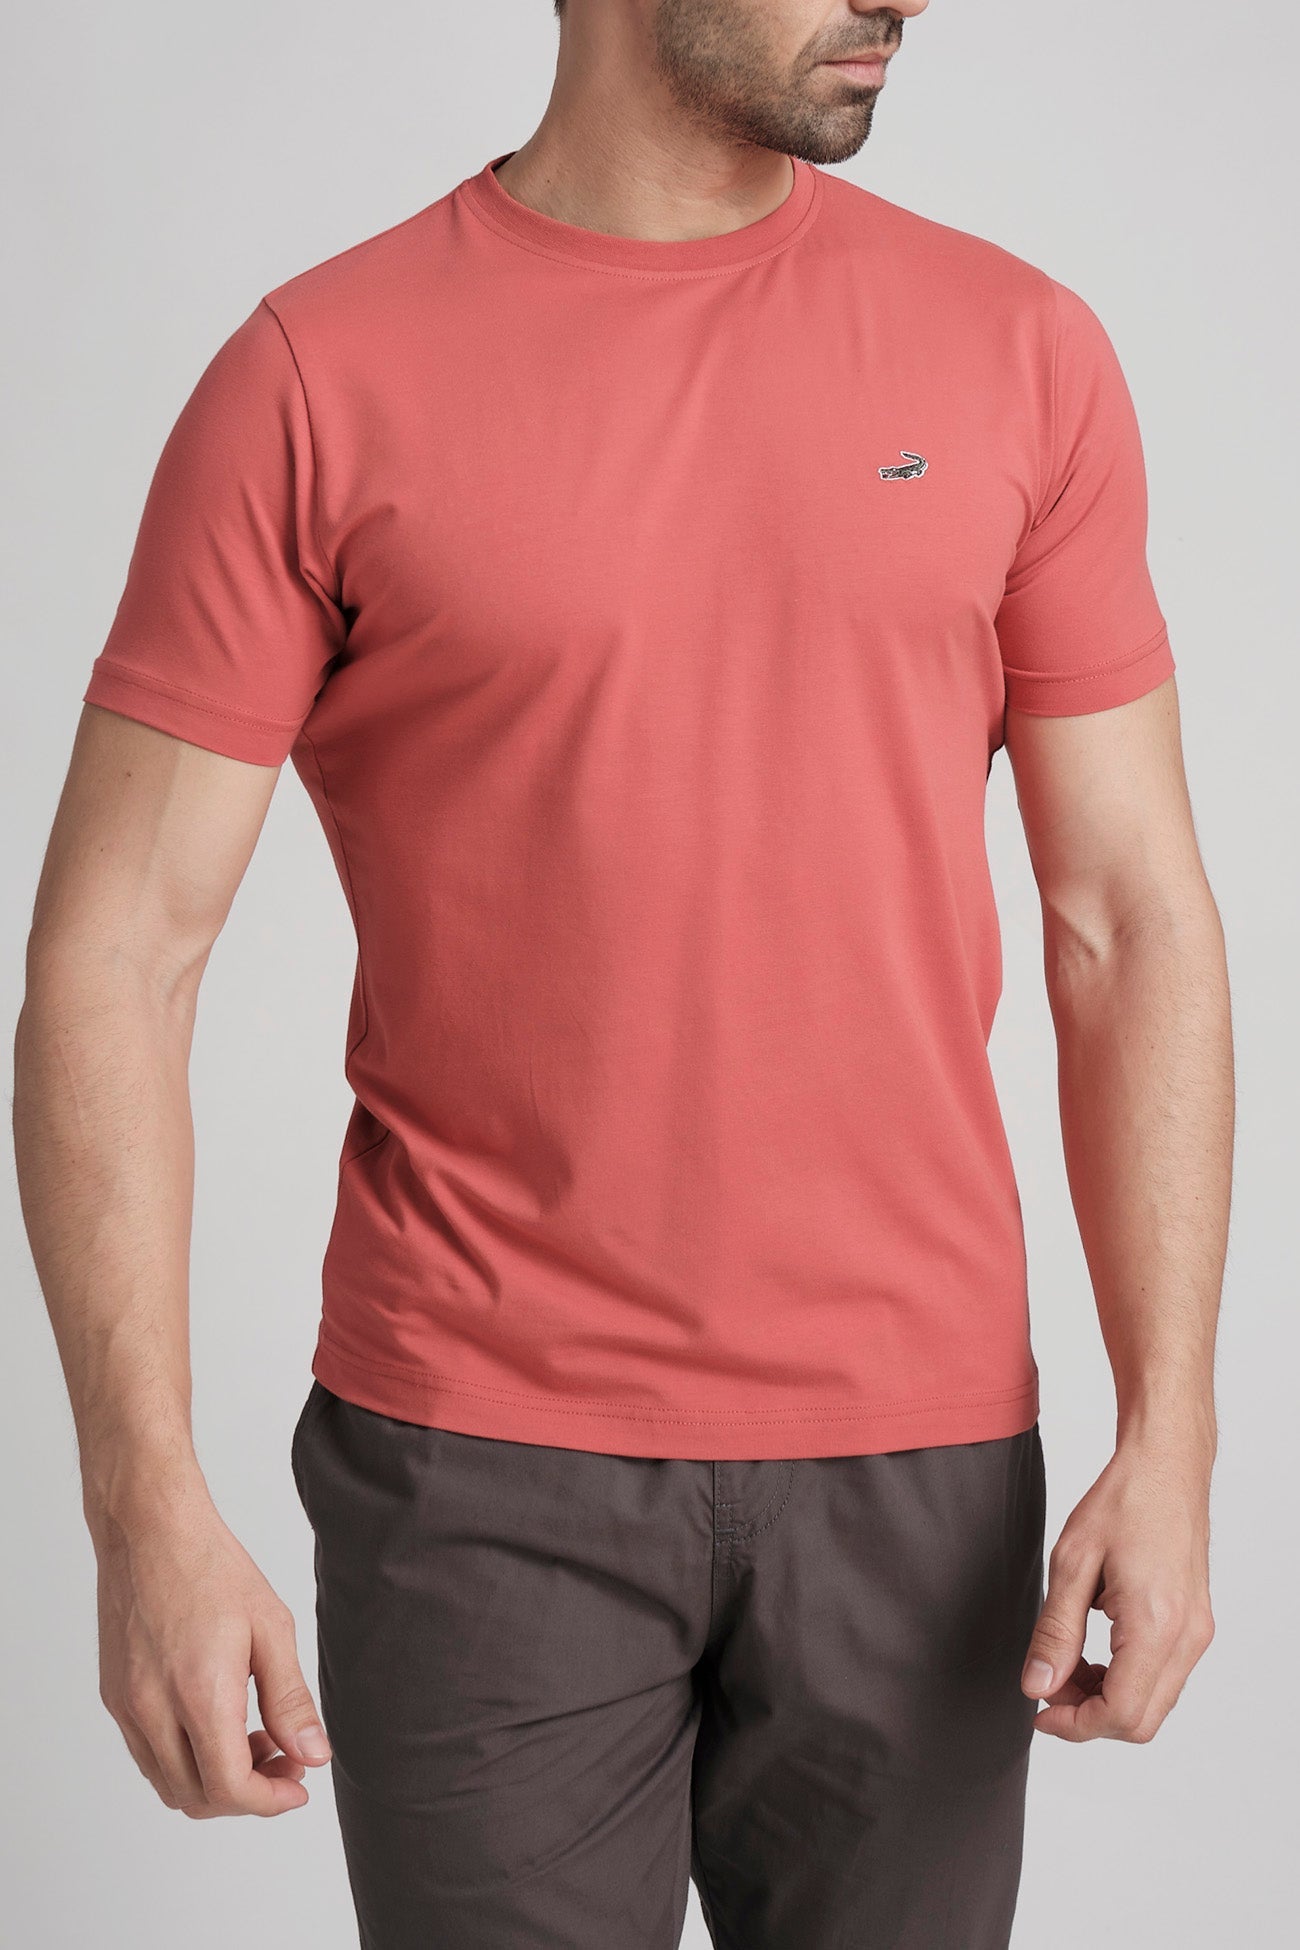 Single Jersey Verve Tee Action Fit - Red Clay